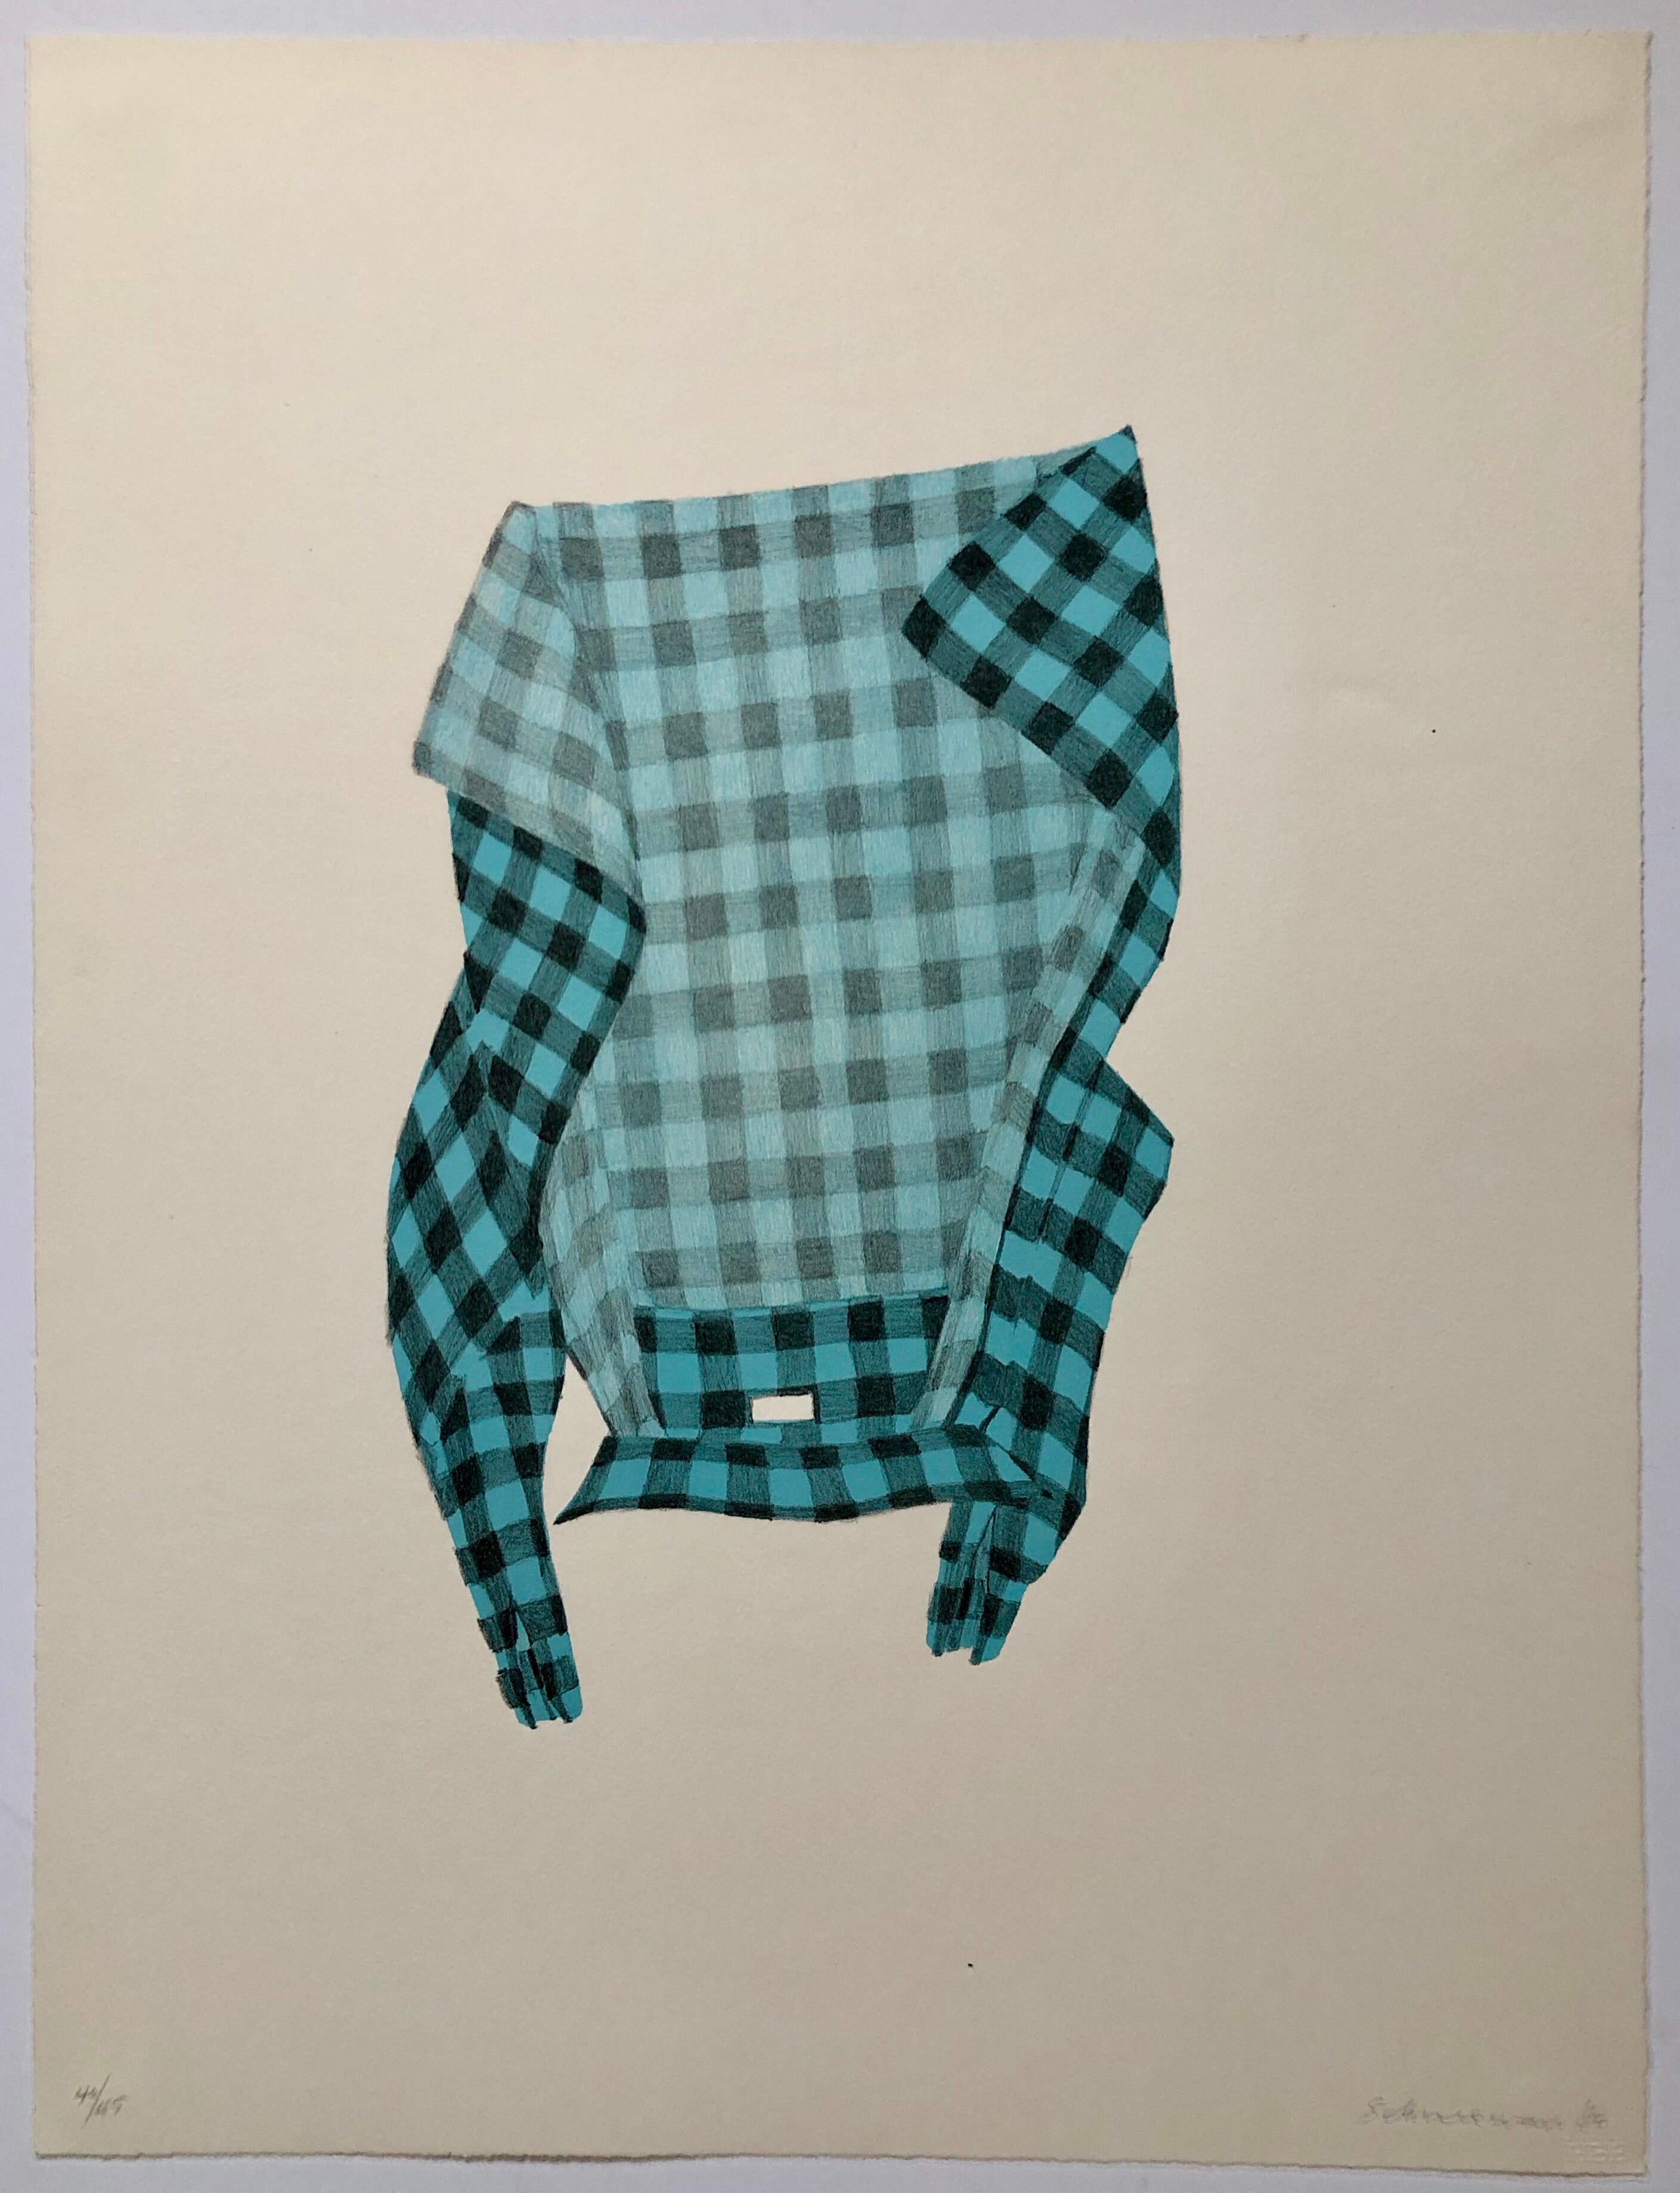 Untitled Still Life Hanging Plaid Shirt, Figurative Poetry Lithograph - Print by George Schneeman